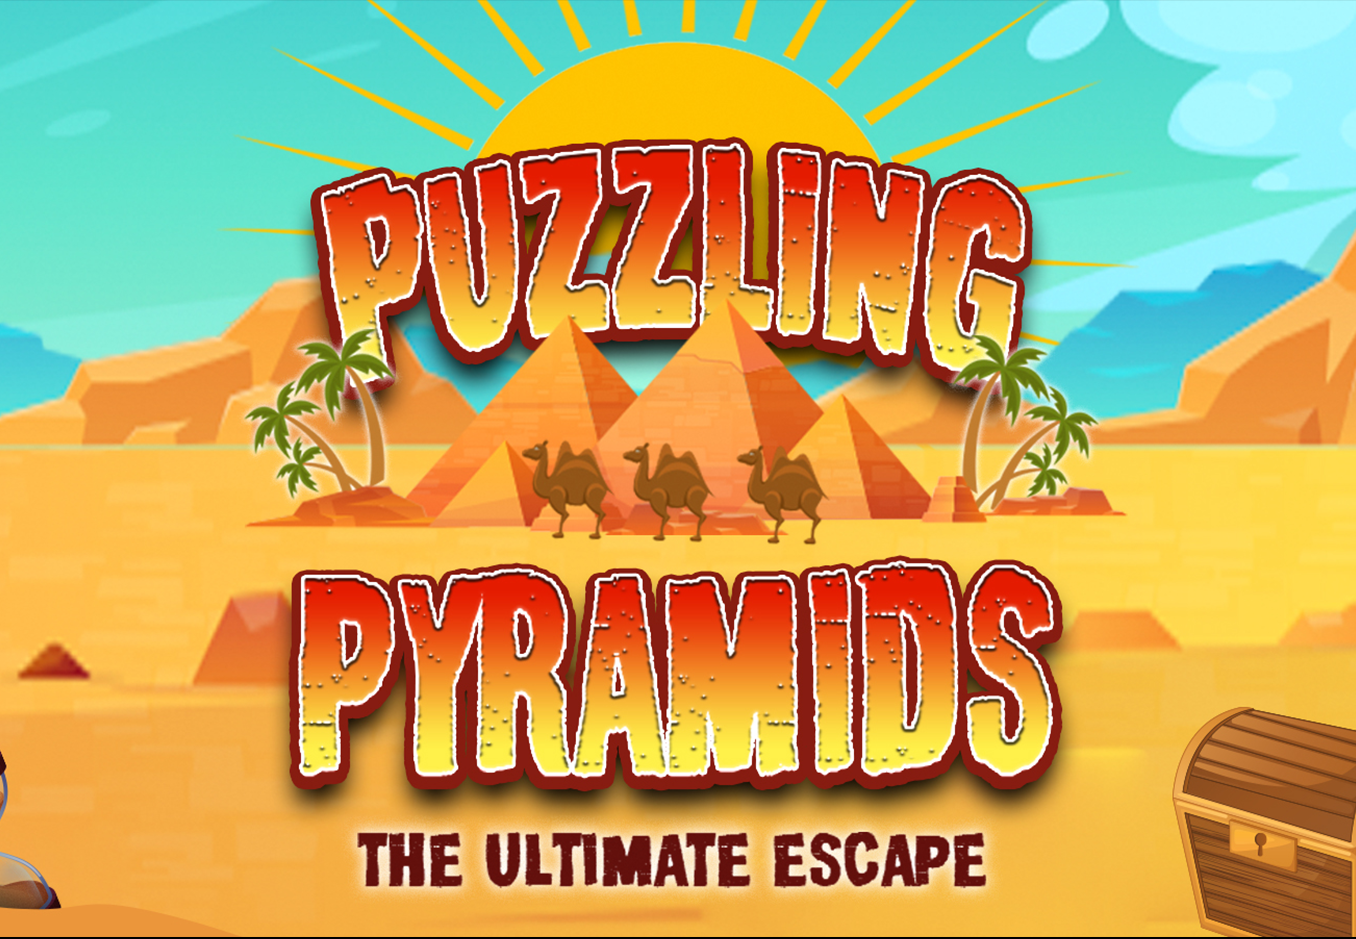 Puzzling Pyramids VBS Game Video